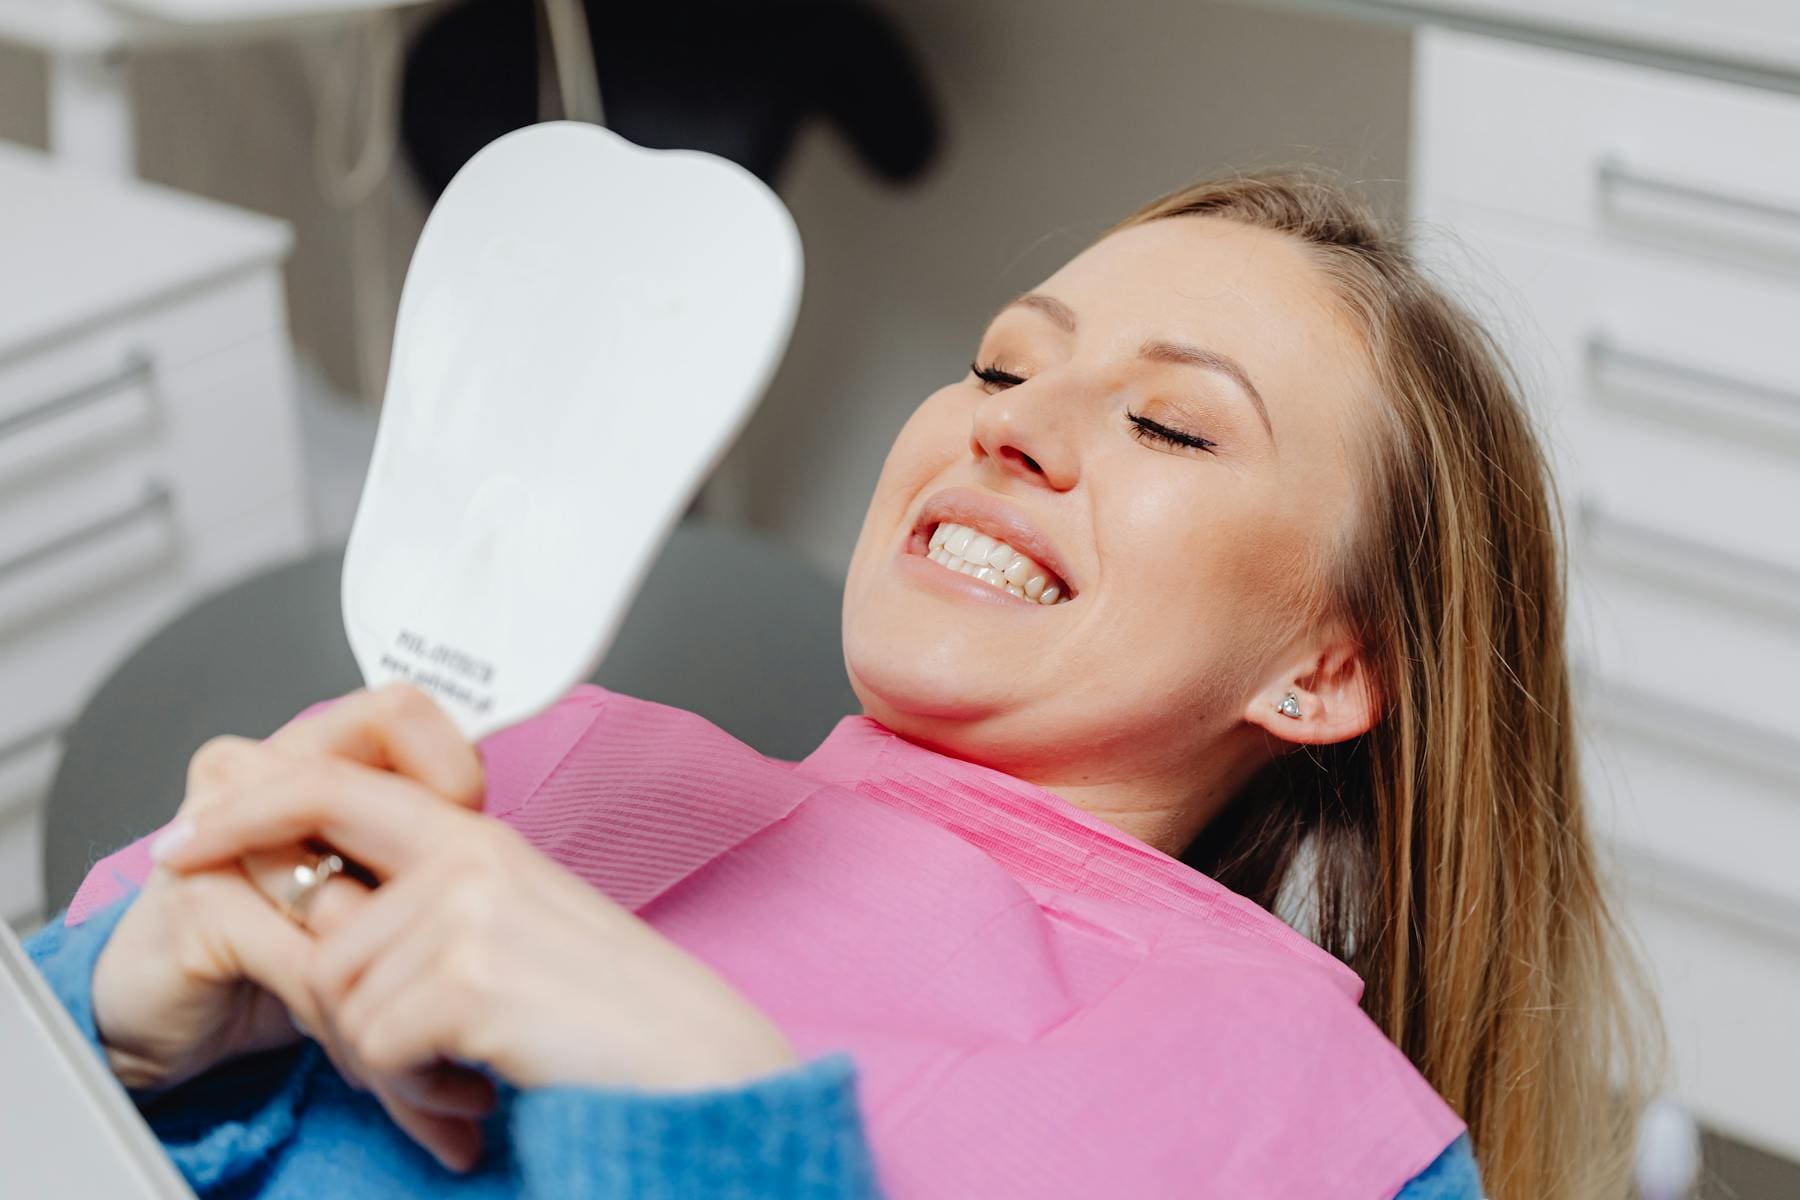 Dental Patient Holds Mirror And Checks Teeth With Smile - Trade Winds Dental